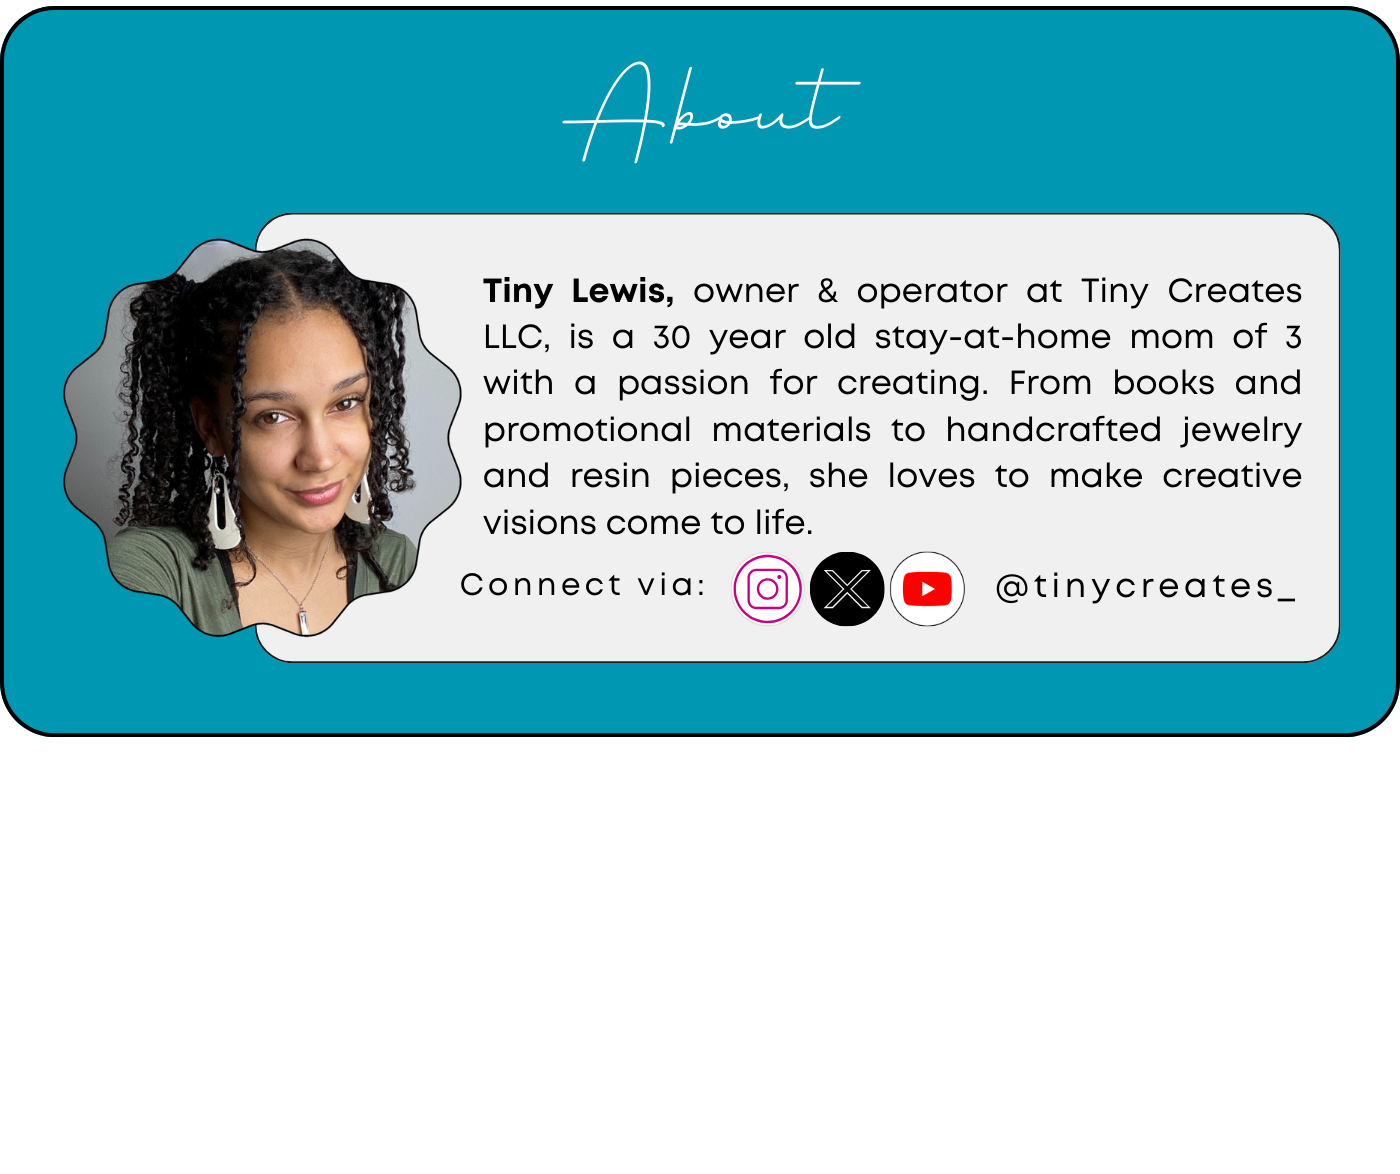 Tiny Lewis, owner & operator at Tiny Creates LLC, is a 30 year old stay-at-home mom of 3 with a passion for creating. From books and promotional materials to handcrafted jewelry and resin pieces, she loves to make creative visions come to life.